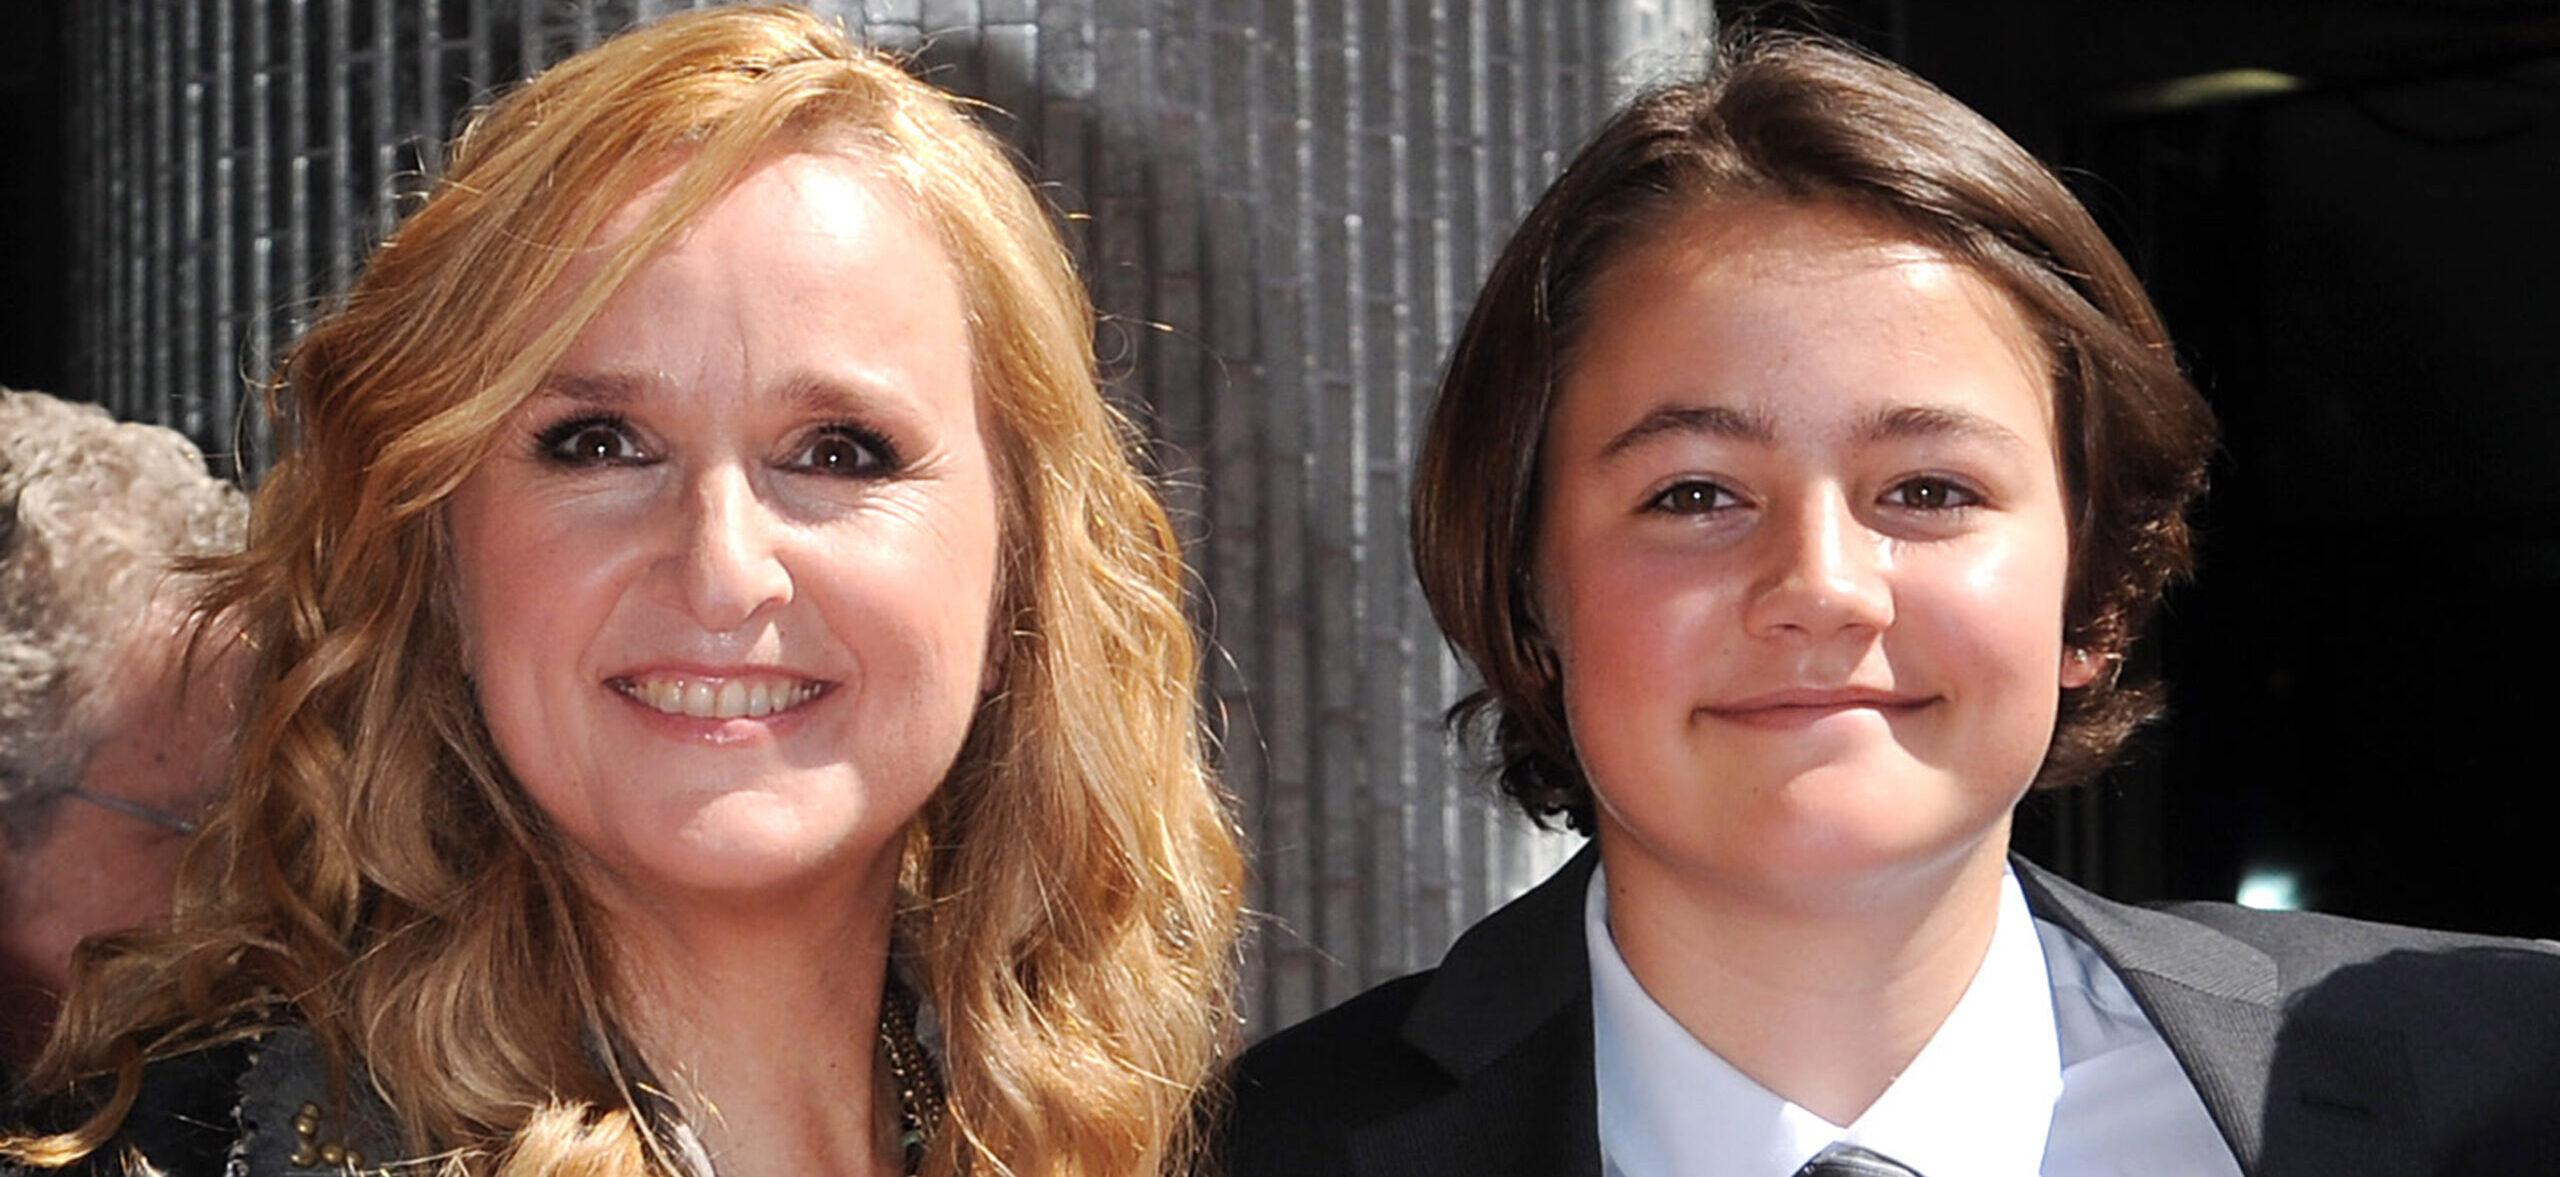 Melissa Etheridge Reflects On Son’s Death From Opioids: ‘The Shame Is Too Big’